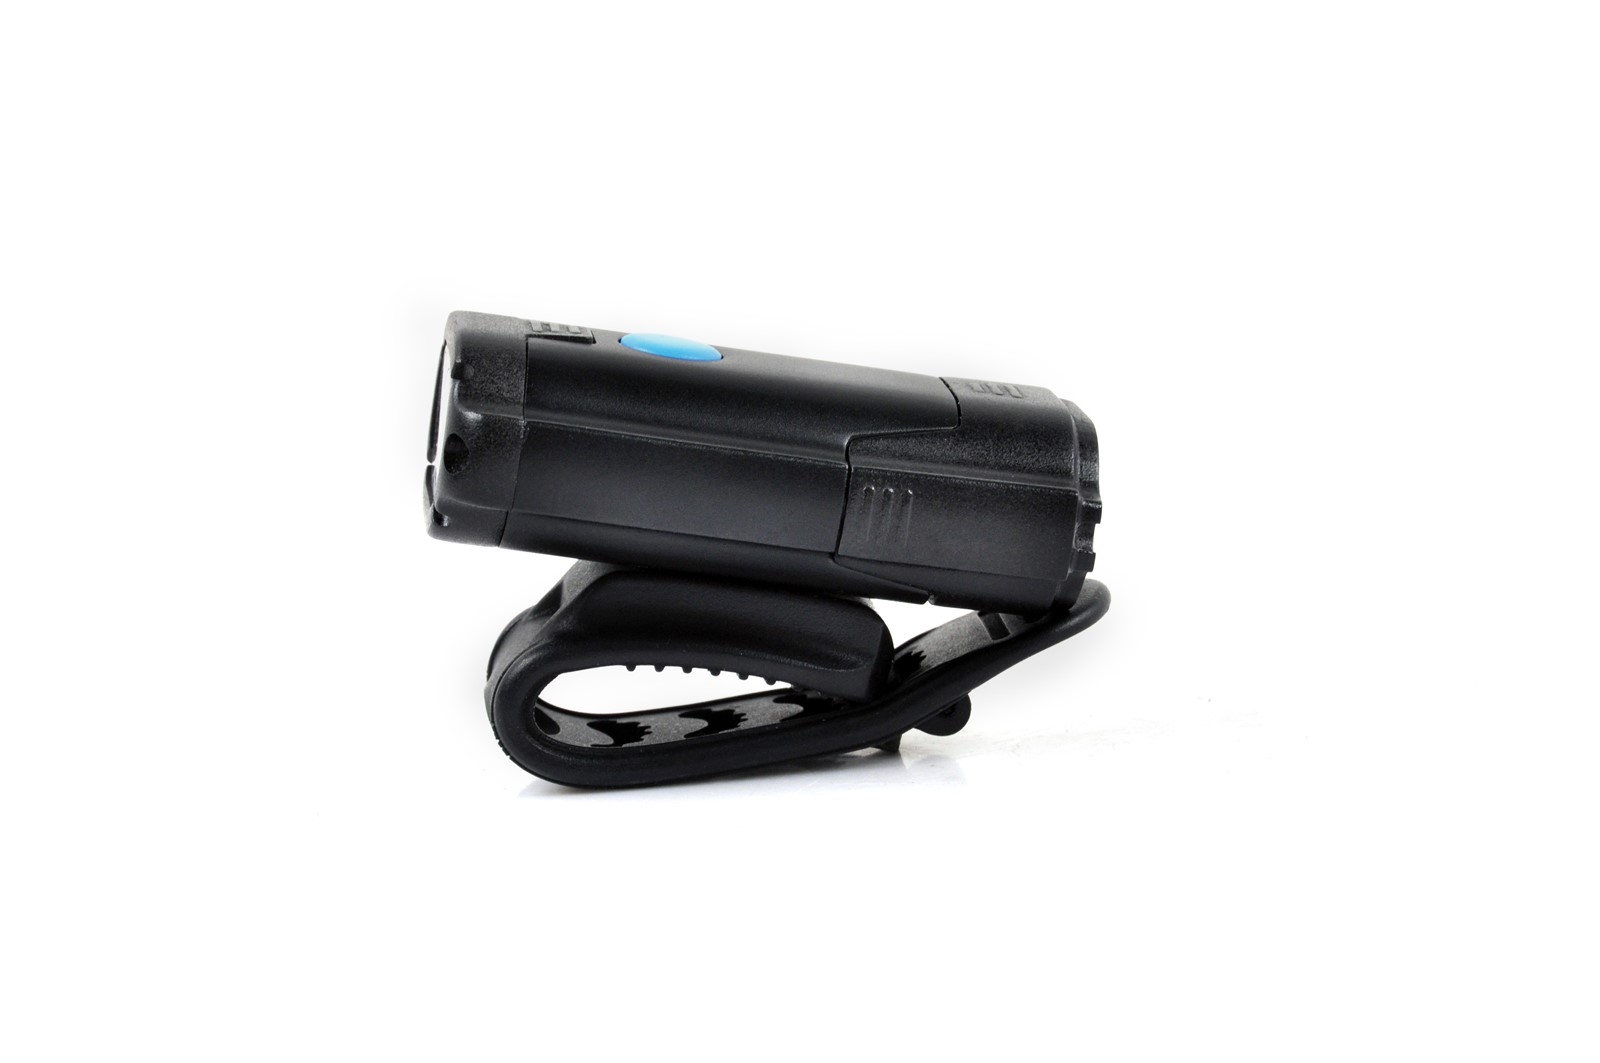 Chinese Manufacturer High Quality Assured Self Contained USB Rechargeable LED Bike Light